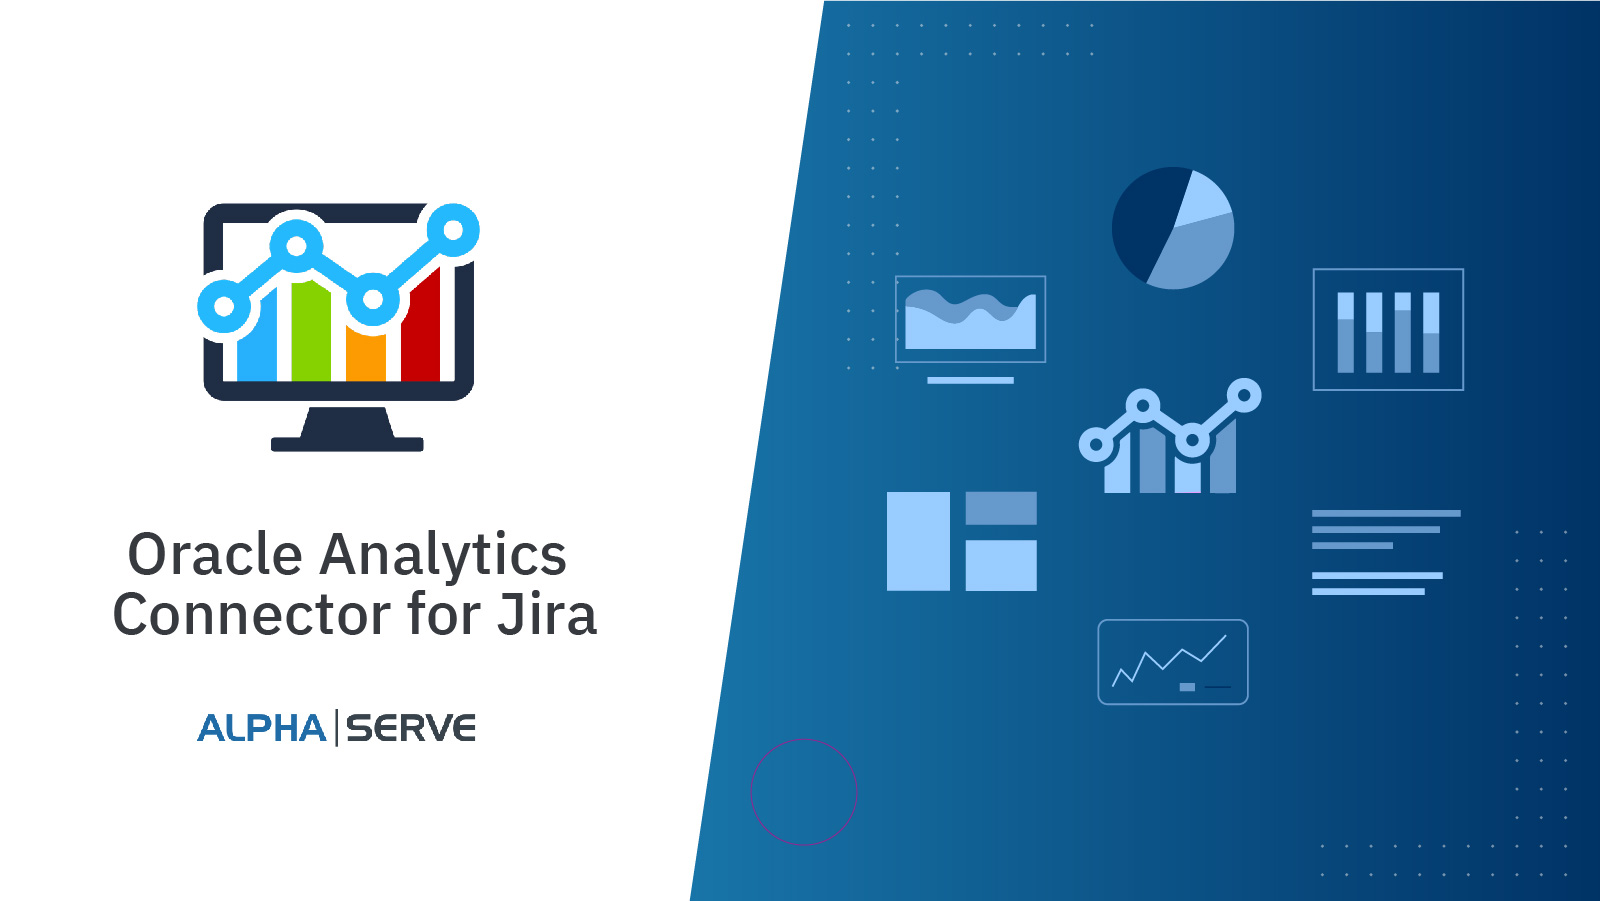 Alpha Serve Presents Oracle Analytics Connector for Jira App on the Atlassian Marketplace